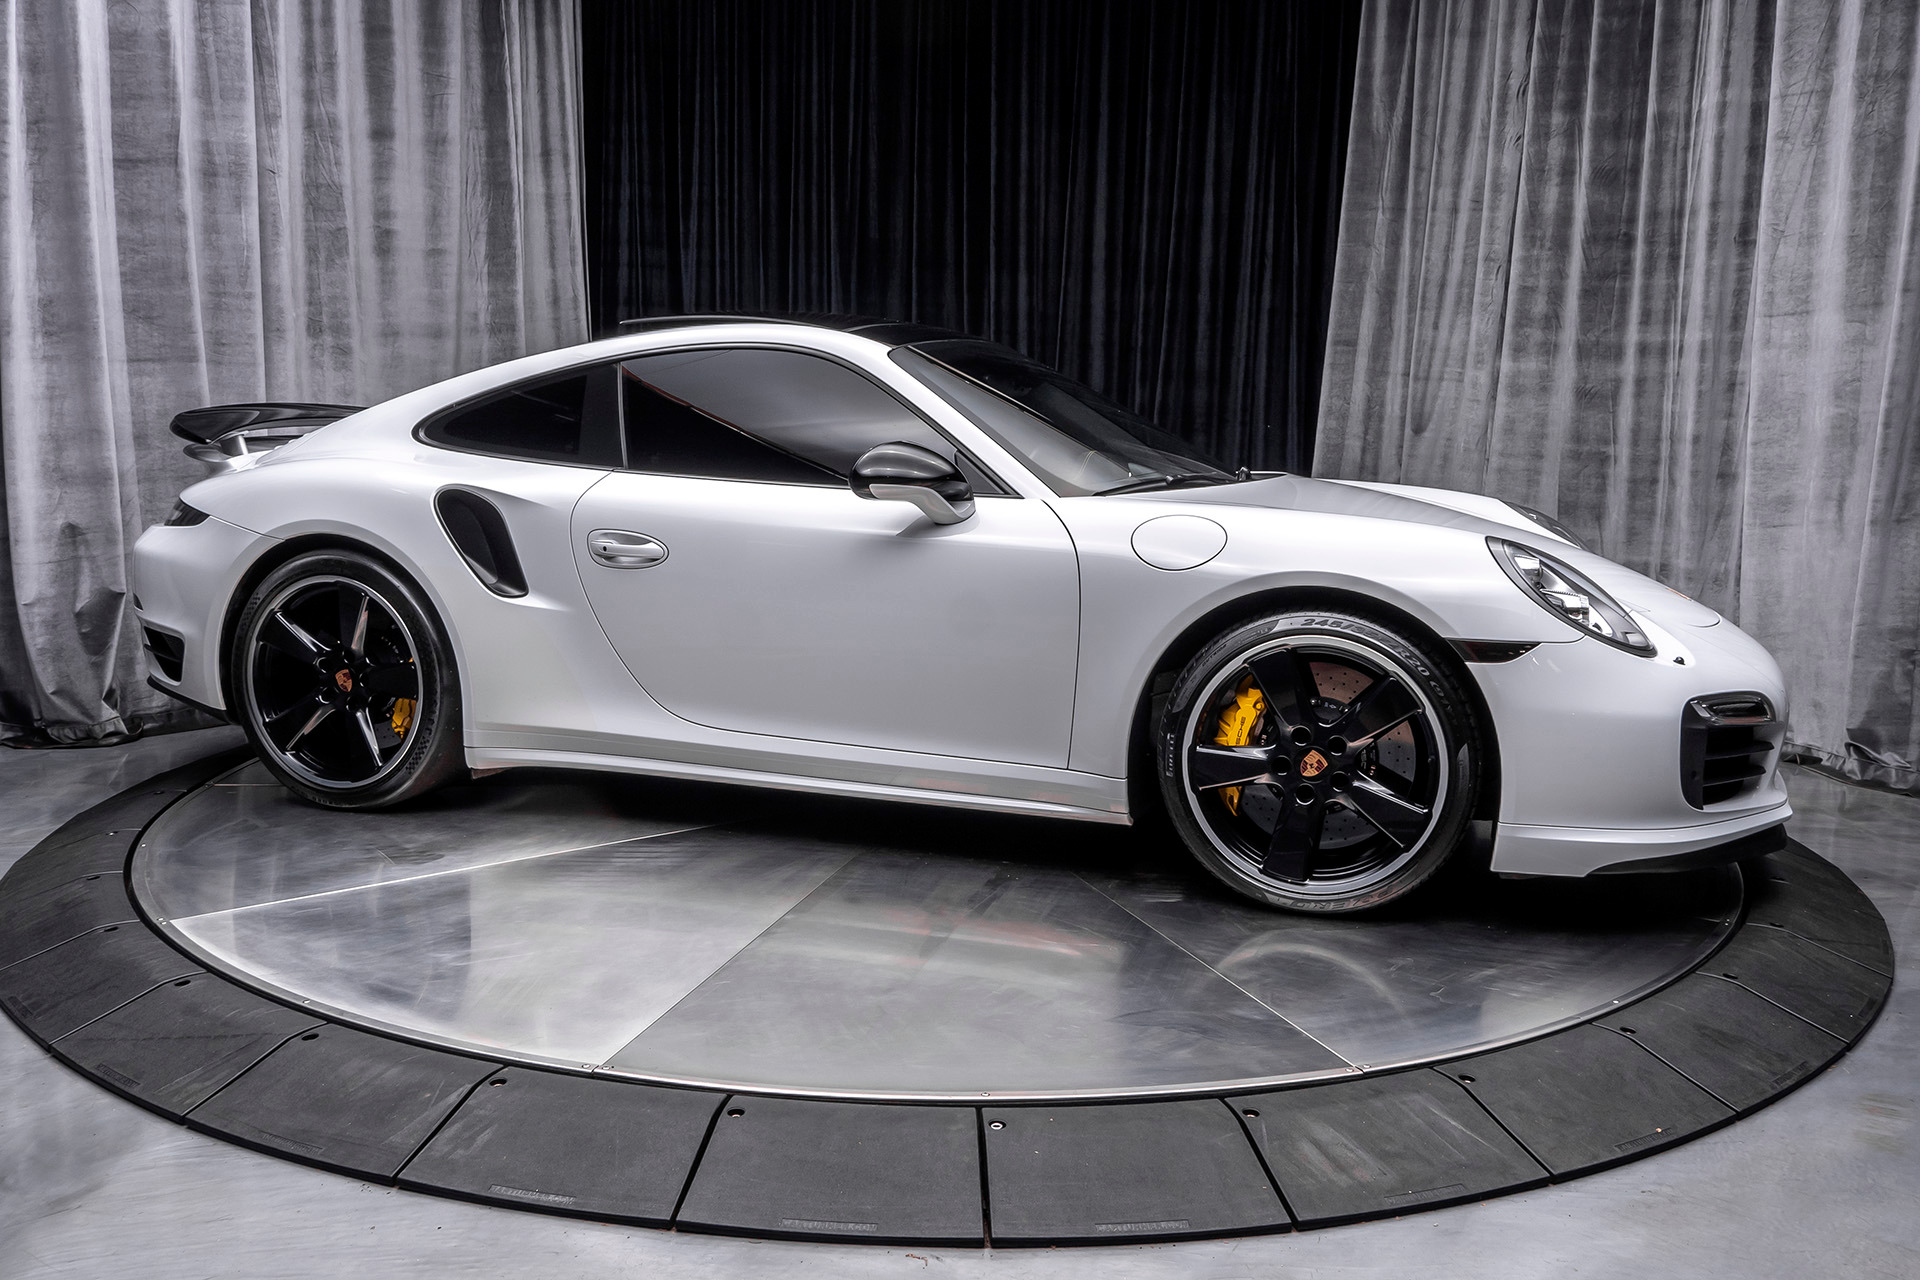 Used-2015-Porsche-911-Turbo-S-Coupe-MSRP-197K-LOADED-WITH-UPGRADES